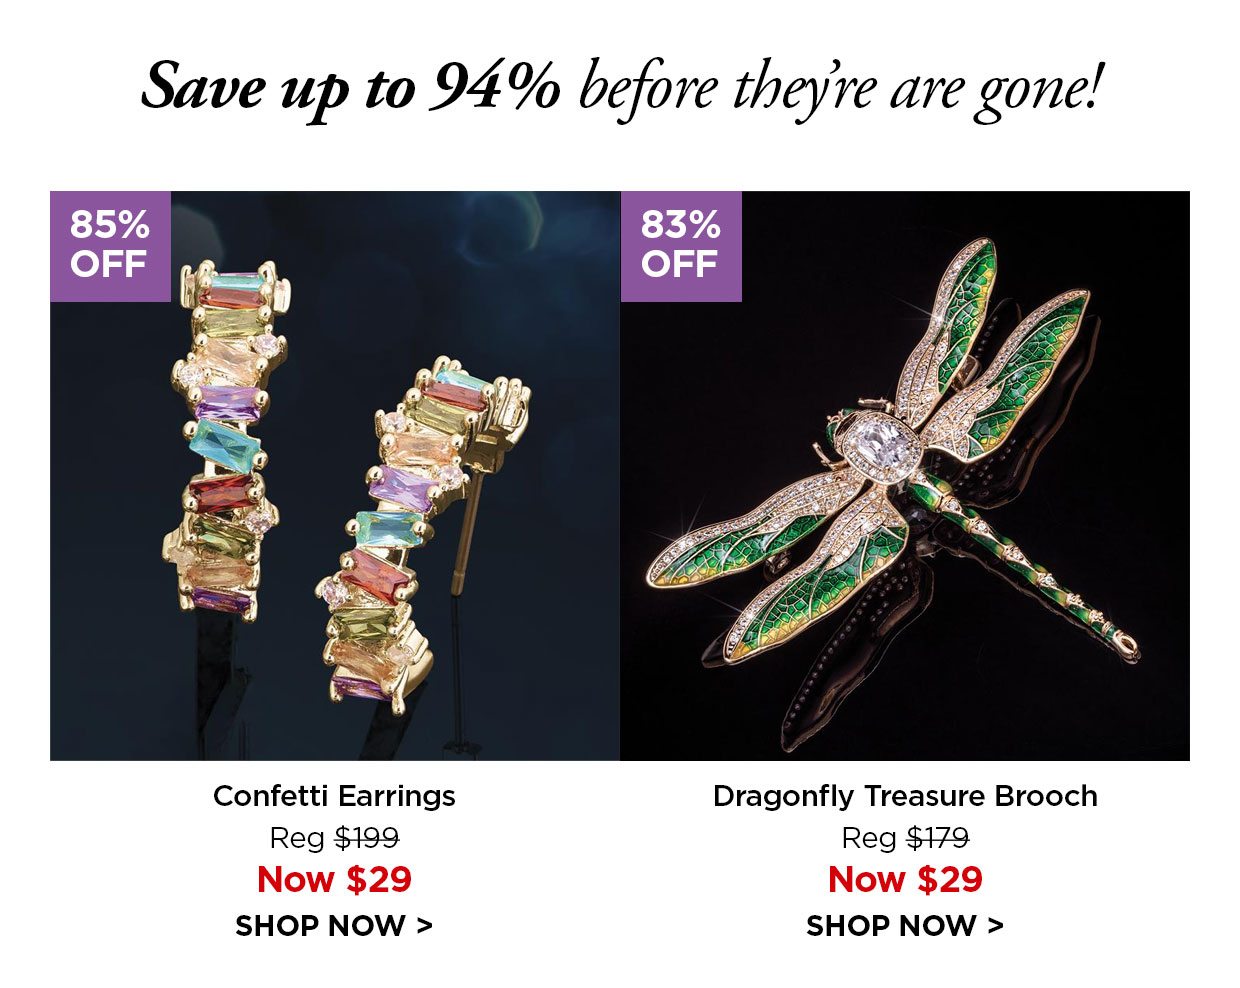 Save up to 94% off before this offer is gone! 85% off. Confetti Earrings Reg $199, Now $29. 83% off. Dragonfly Treasure Brooch Reg $179, Now $29.